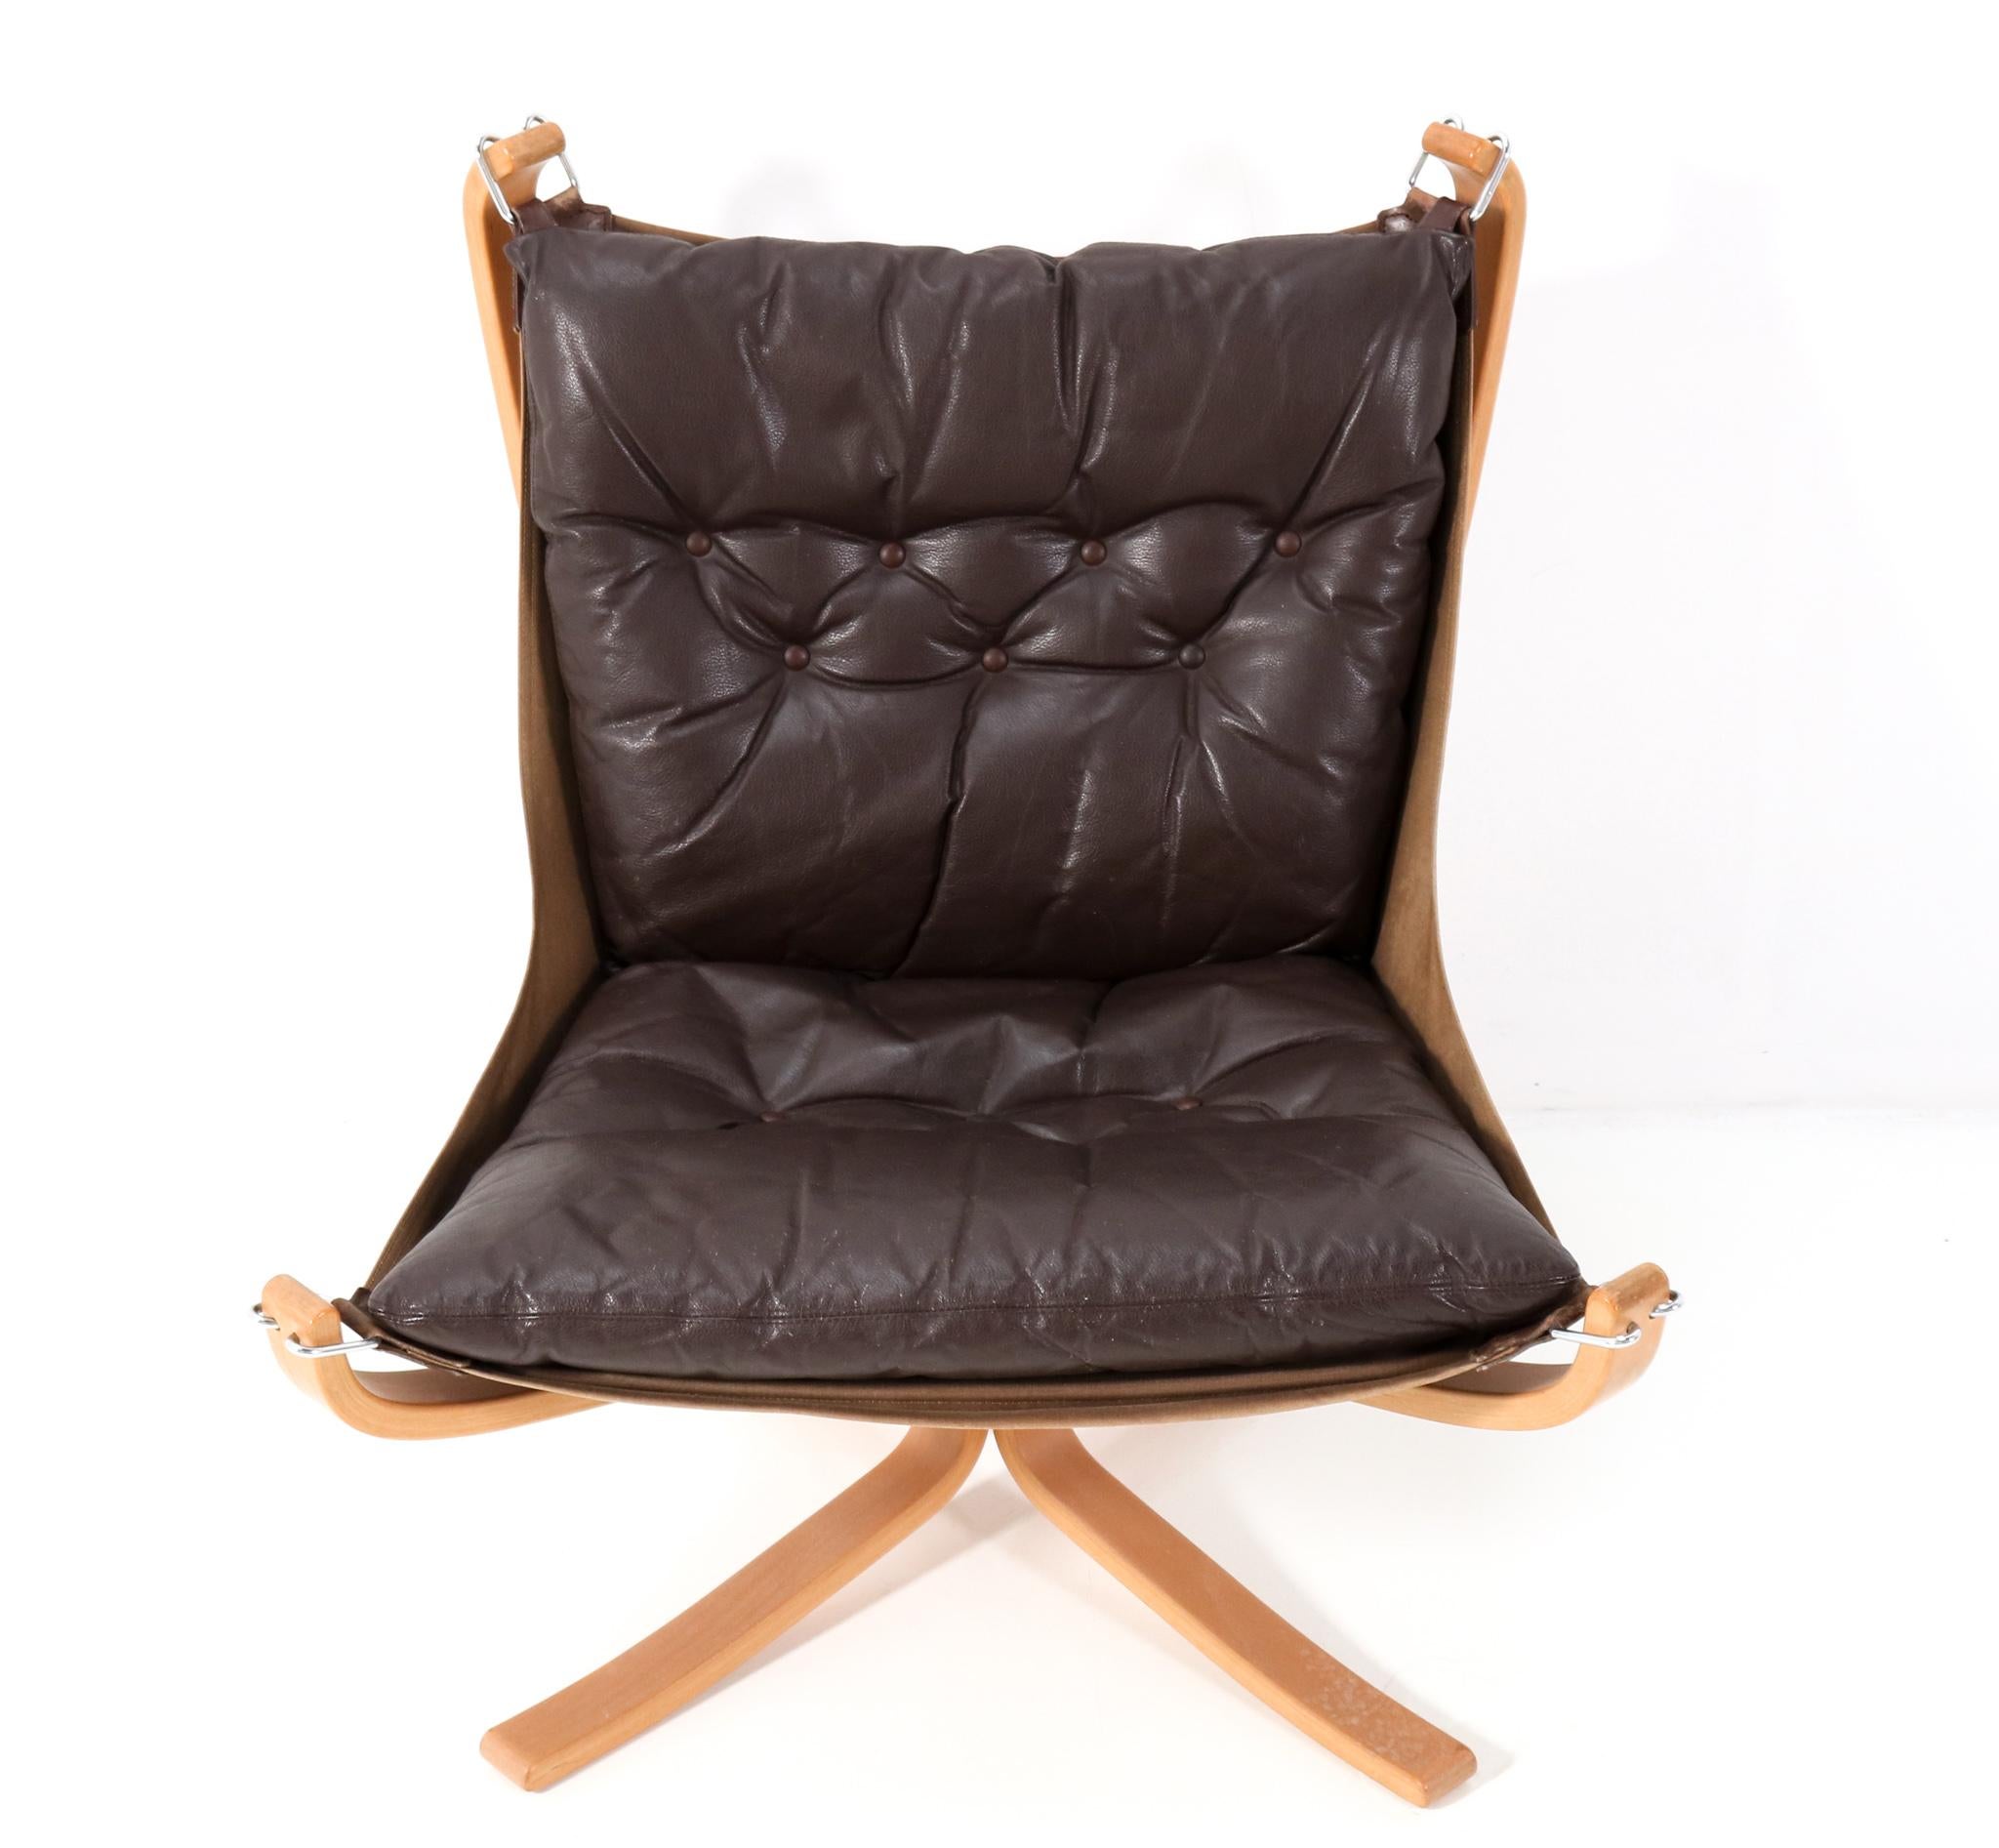 Stunning Mid-Century Modern Falcon lounge chair.
Design by Sigurd Ressell for Vatne Møbler.
Striking Norwegian design from the 1970s
Solid steam bend lacquered beech frame with stretched canvas.
With original brown leather cushion.
This